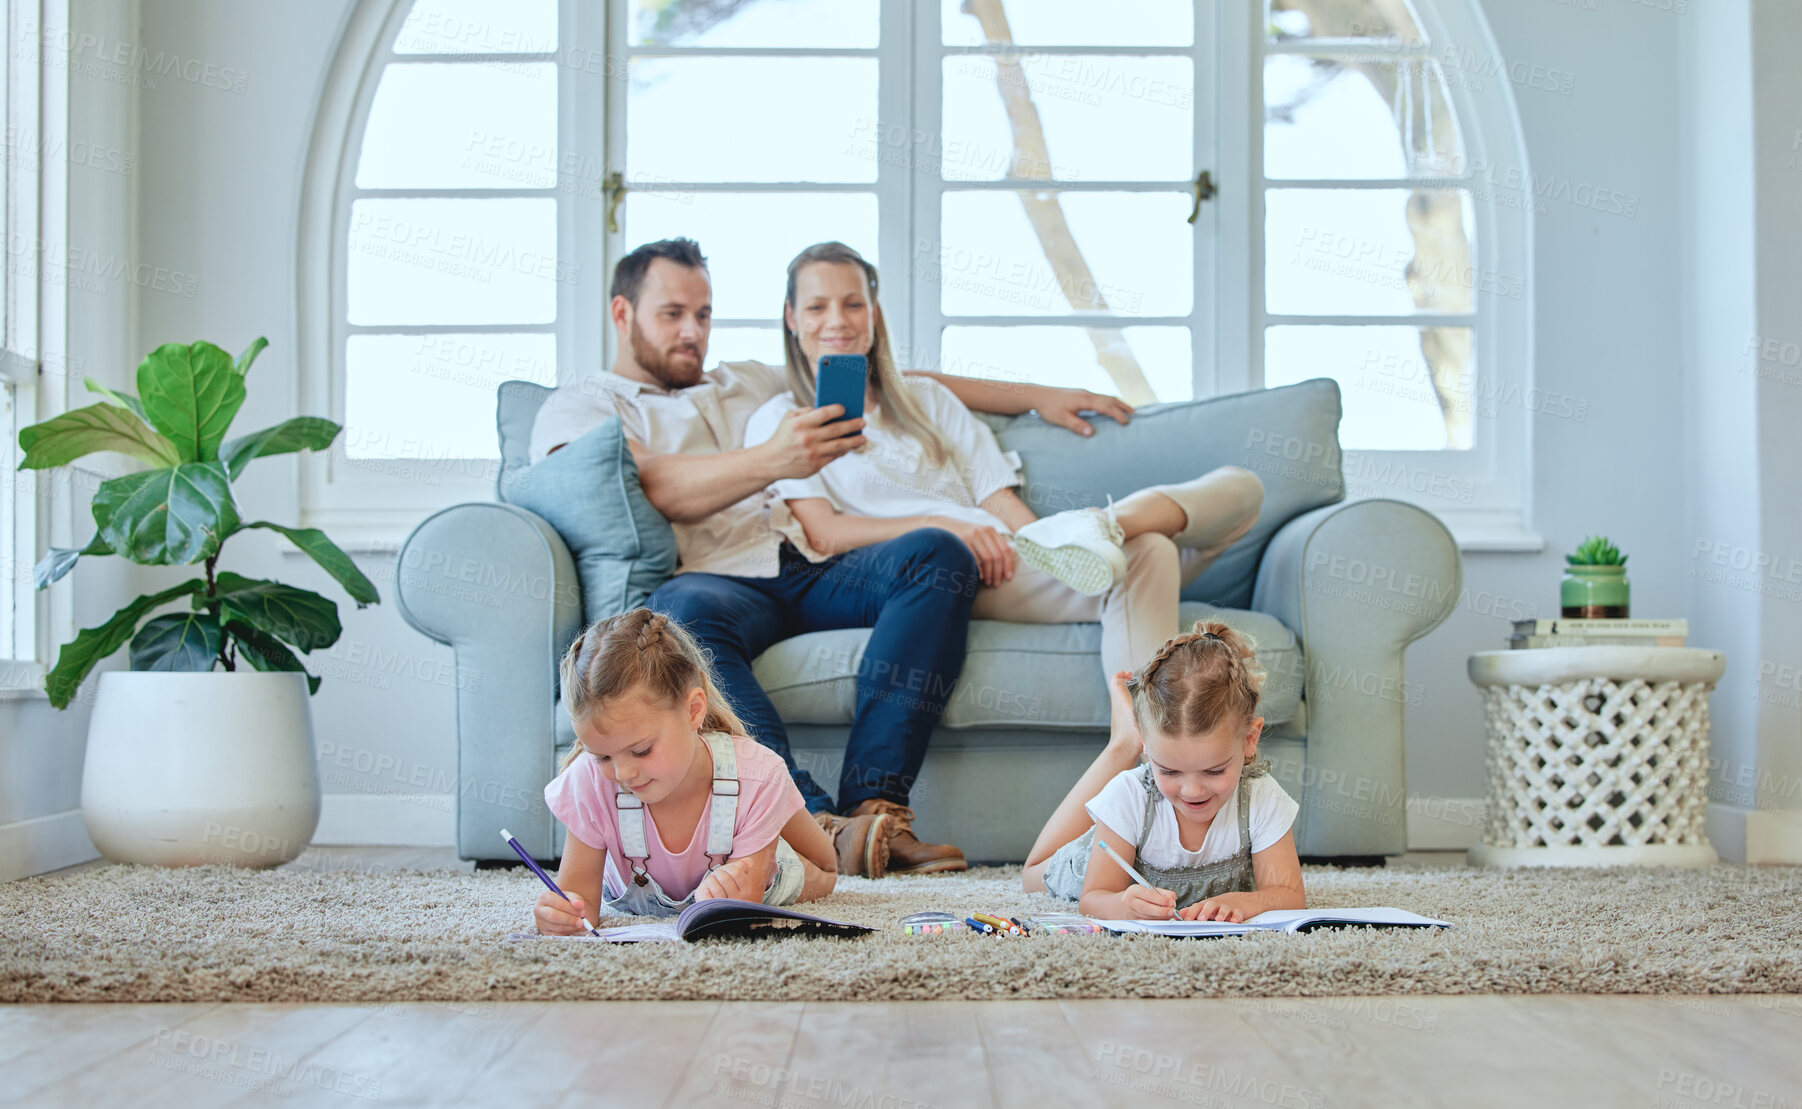 Buy stock photo Shot of a young family relaxing at home